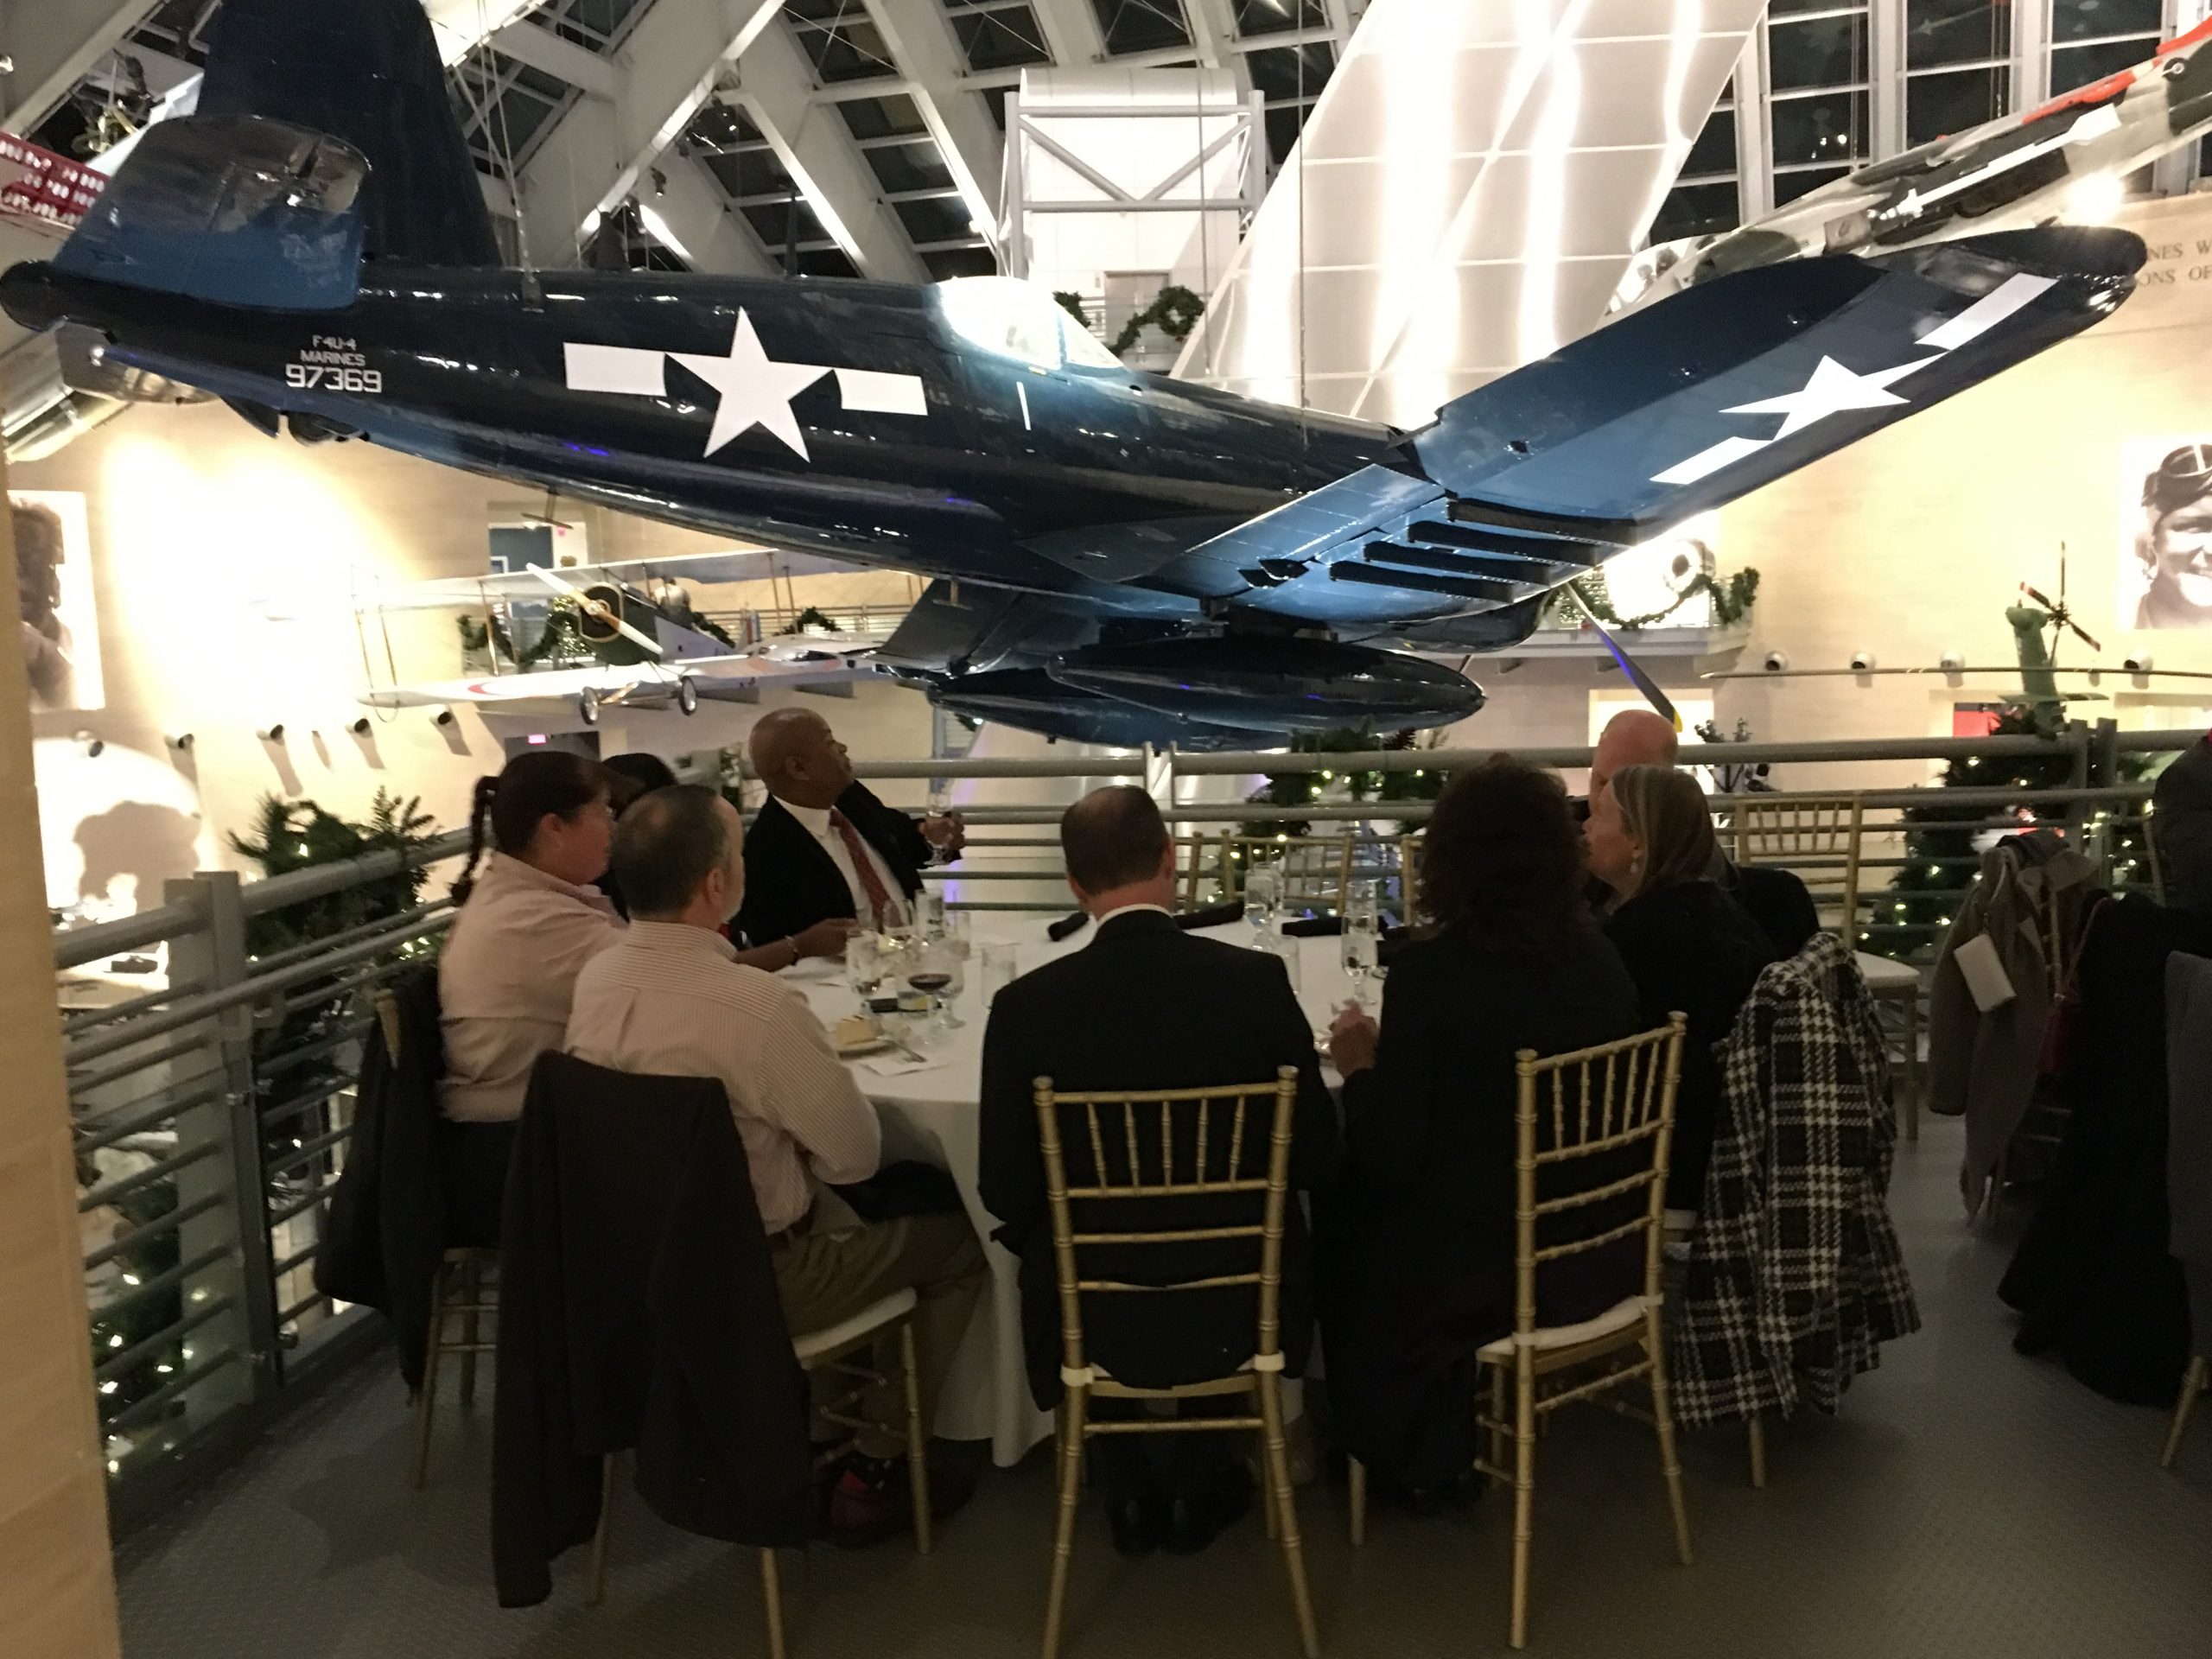 Dinner at the National Museum of the Marine Corps